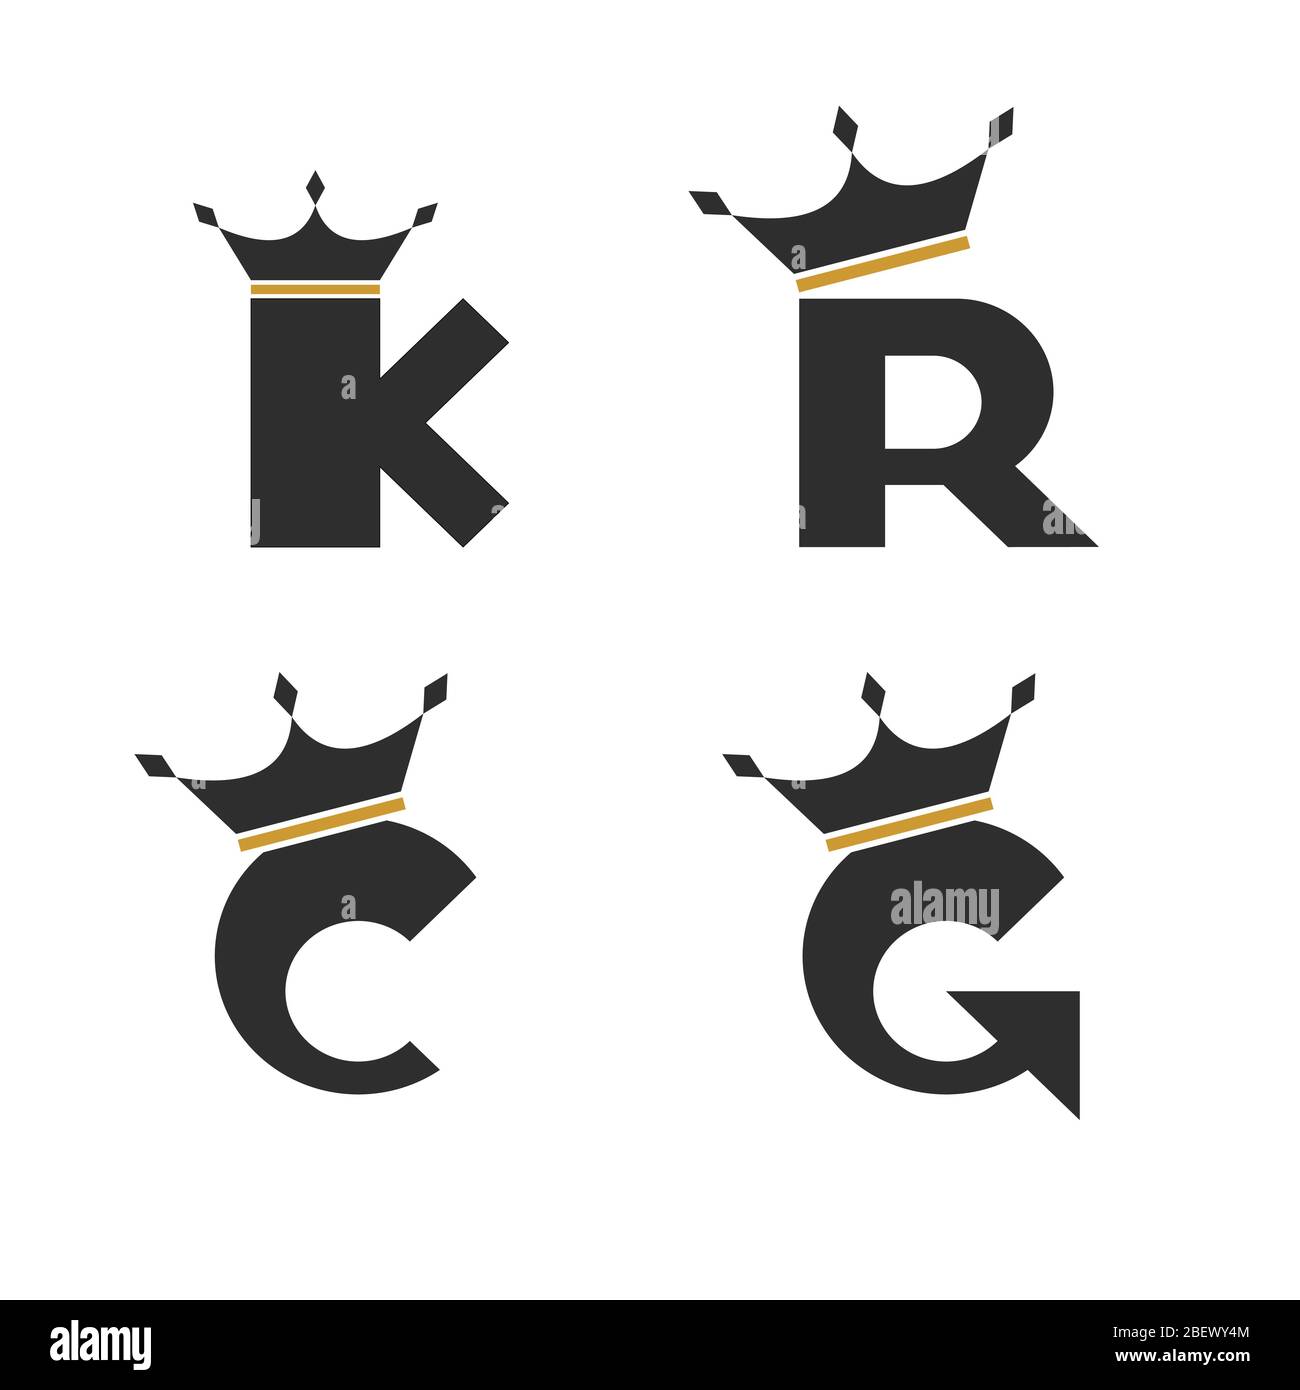 Set of letter with crown logo design, initial letter K, R, C, and G graphic icon and symbol, isolated on white background. Stock Vector